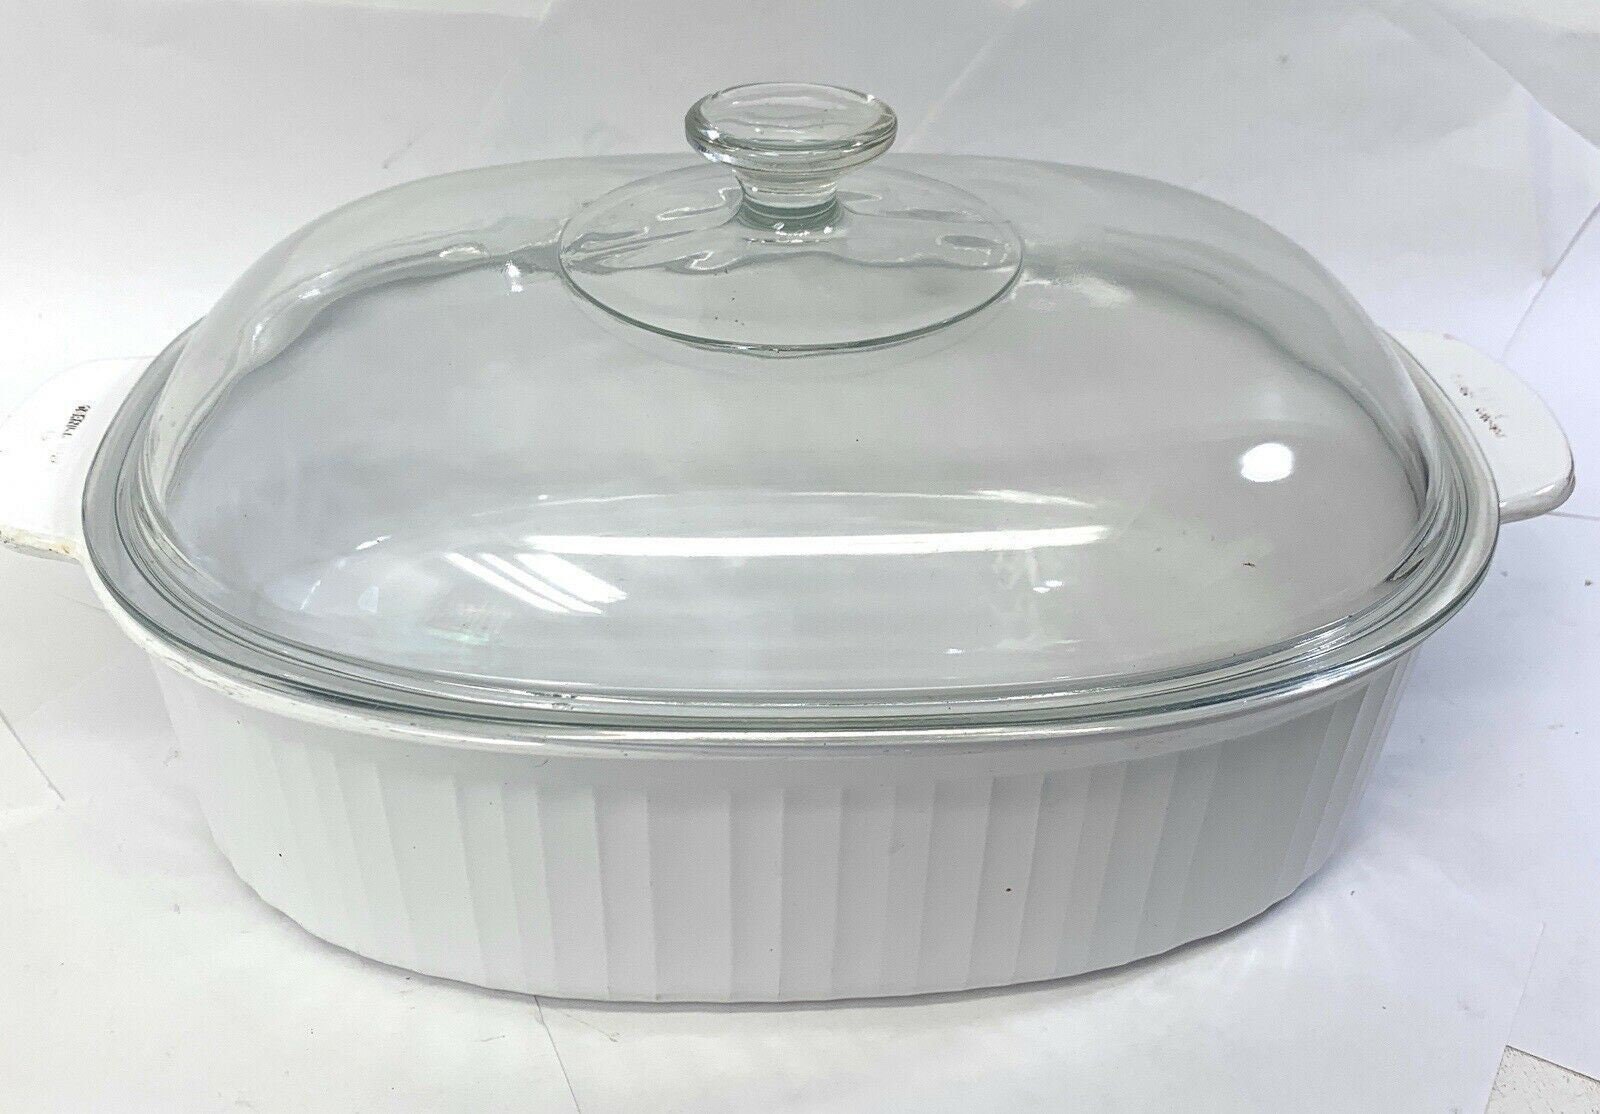 A RARE FRENCH WHITE F-4-B OVAL ROASTER 